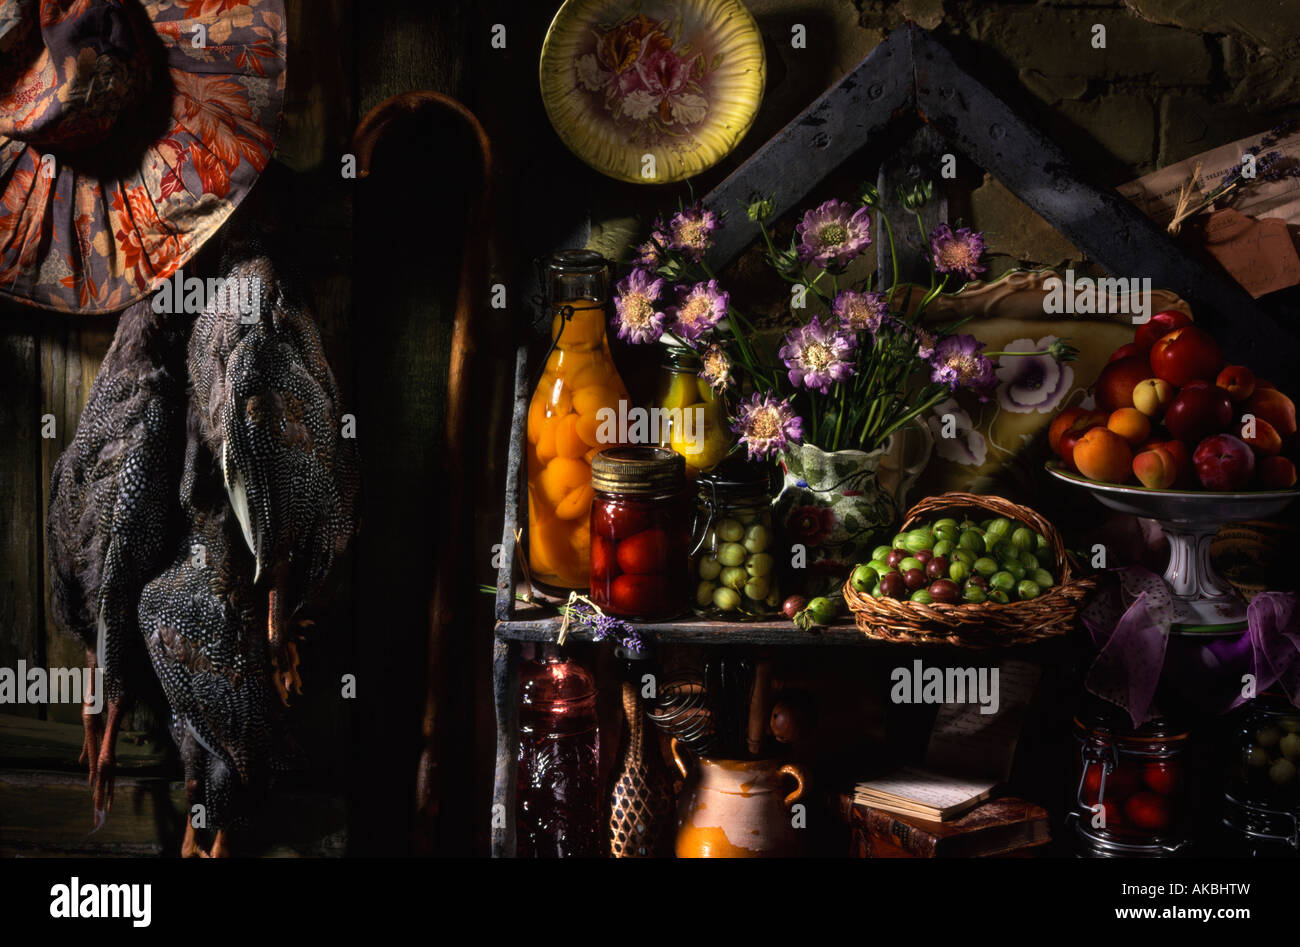 Game and gooseberries picturesque still life editorial food Stock Photo